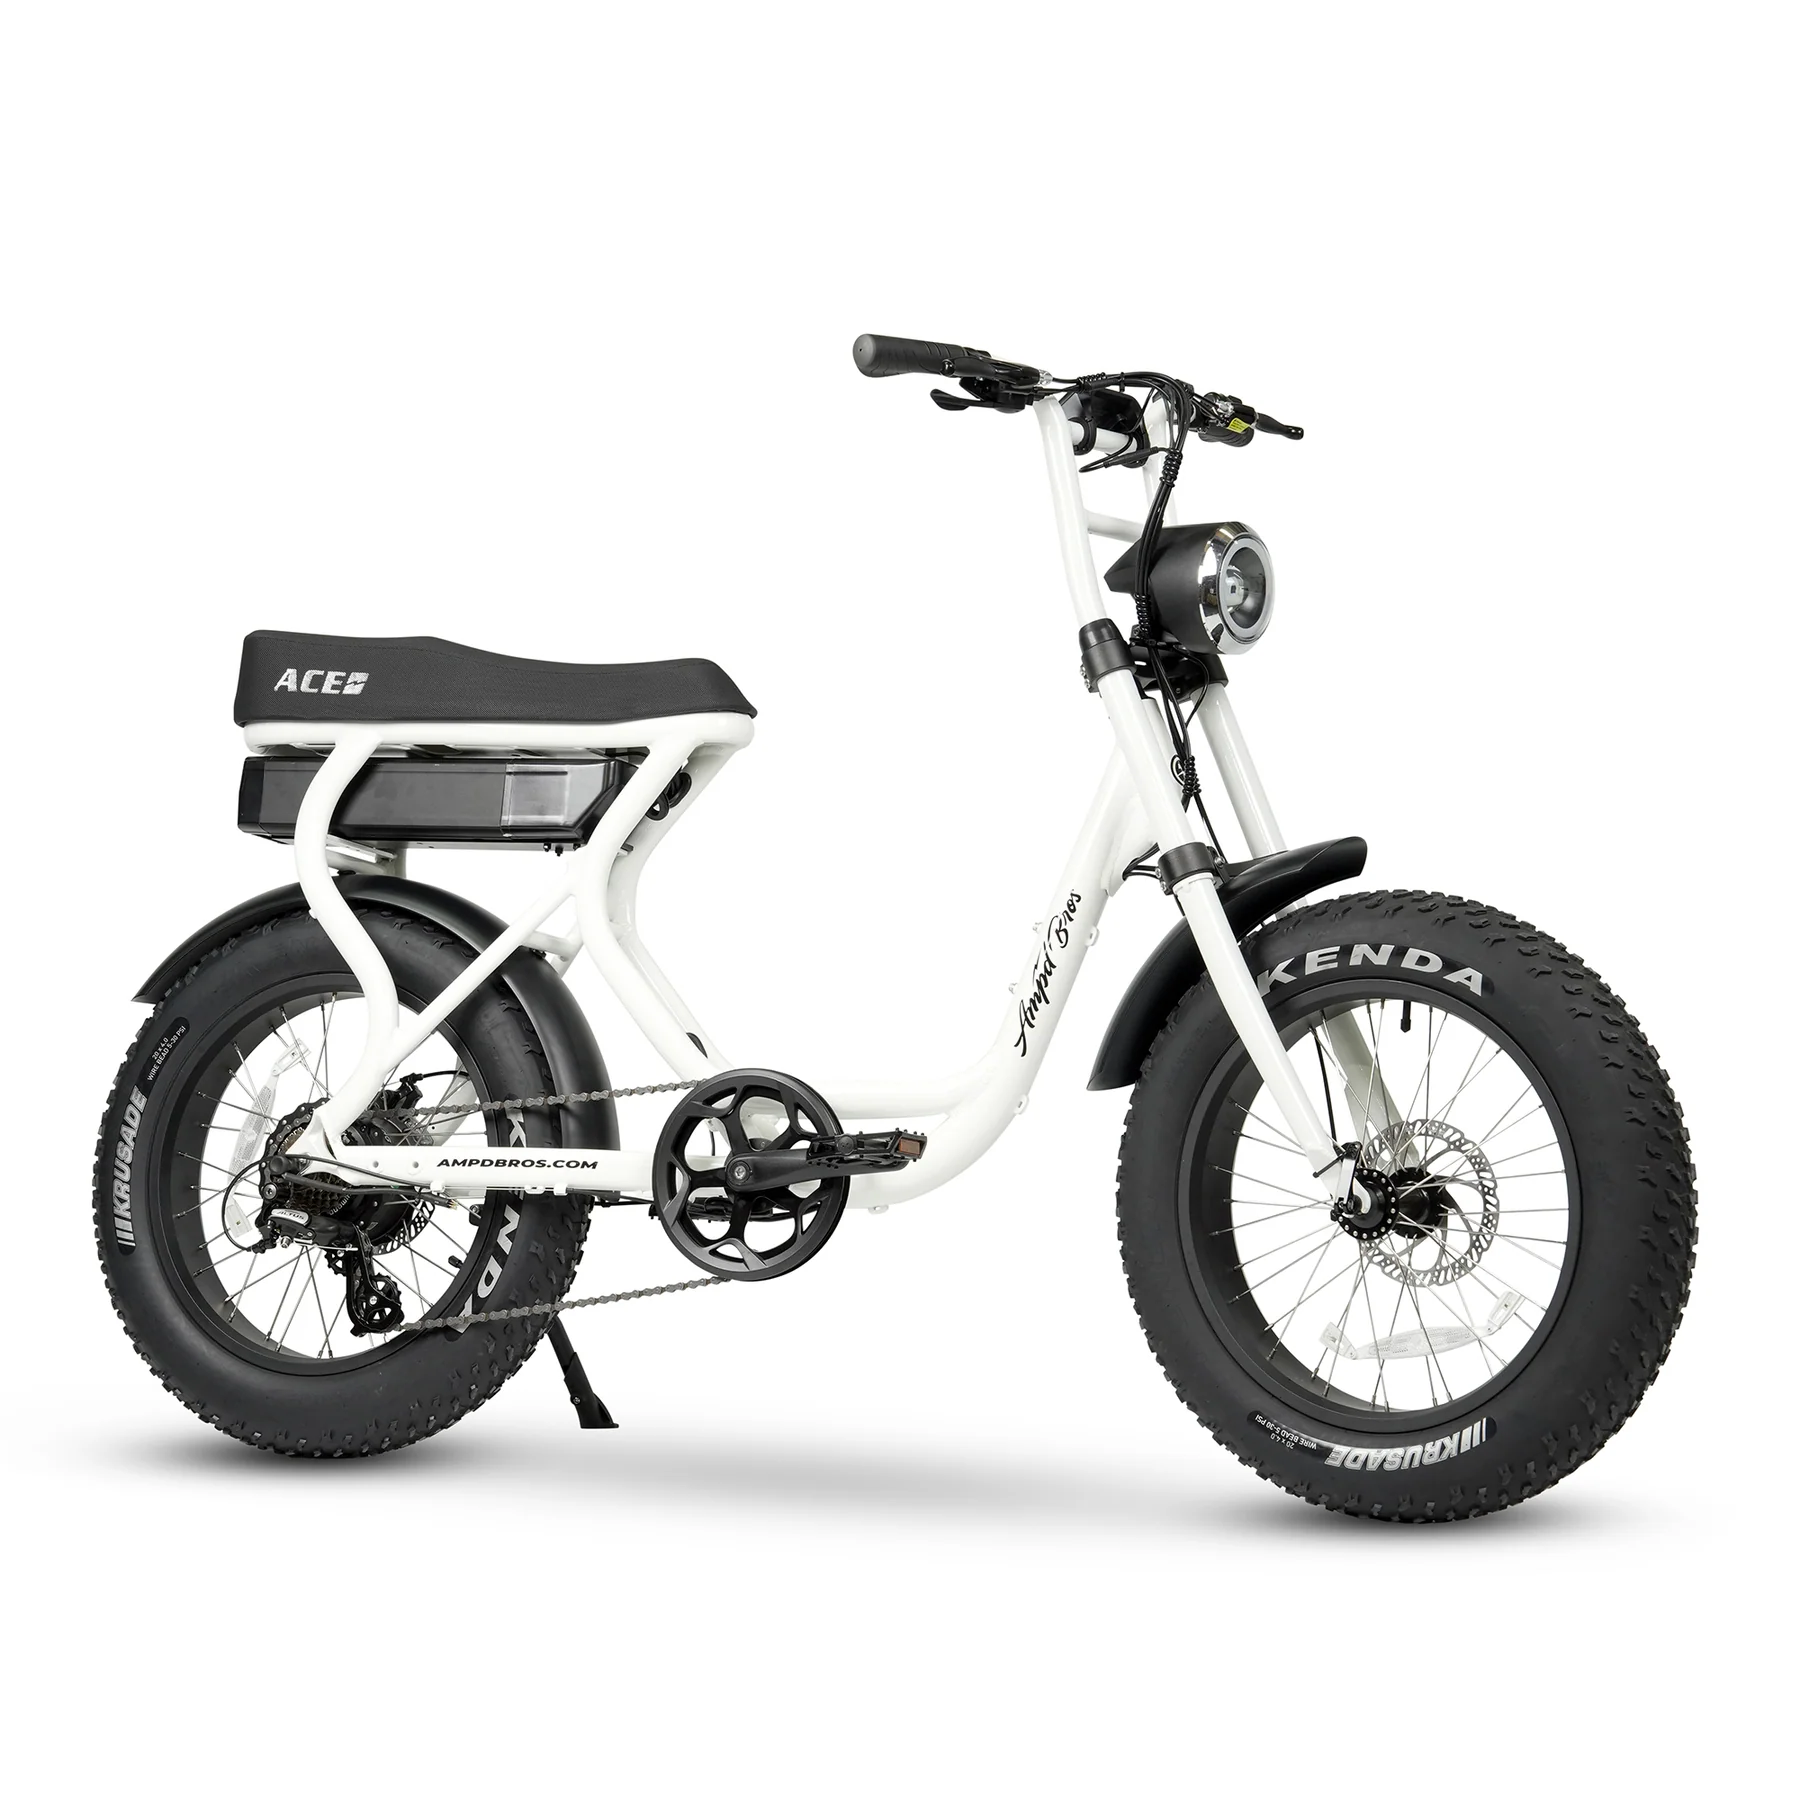 Ampd Bros Ace S Electric Bike - Ice White